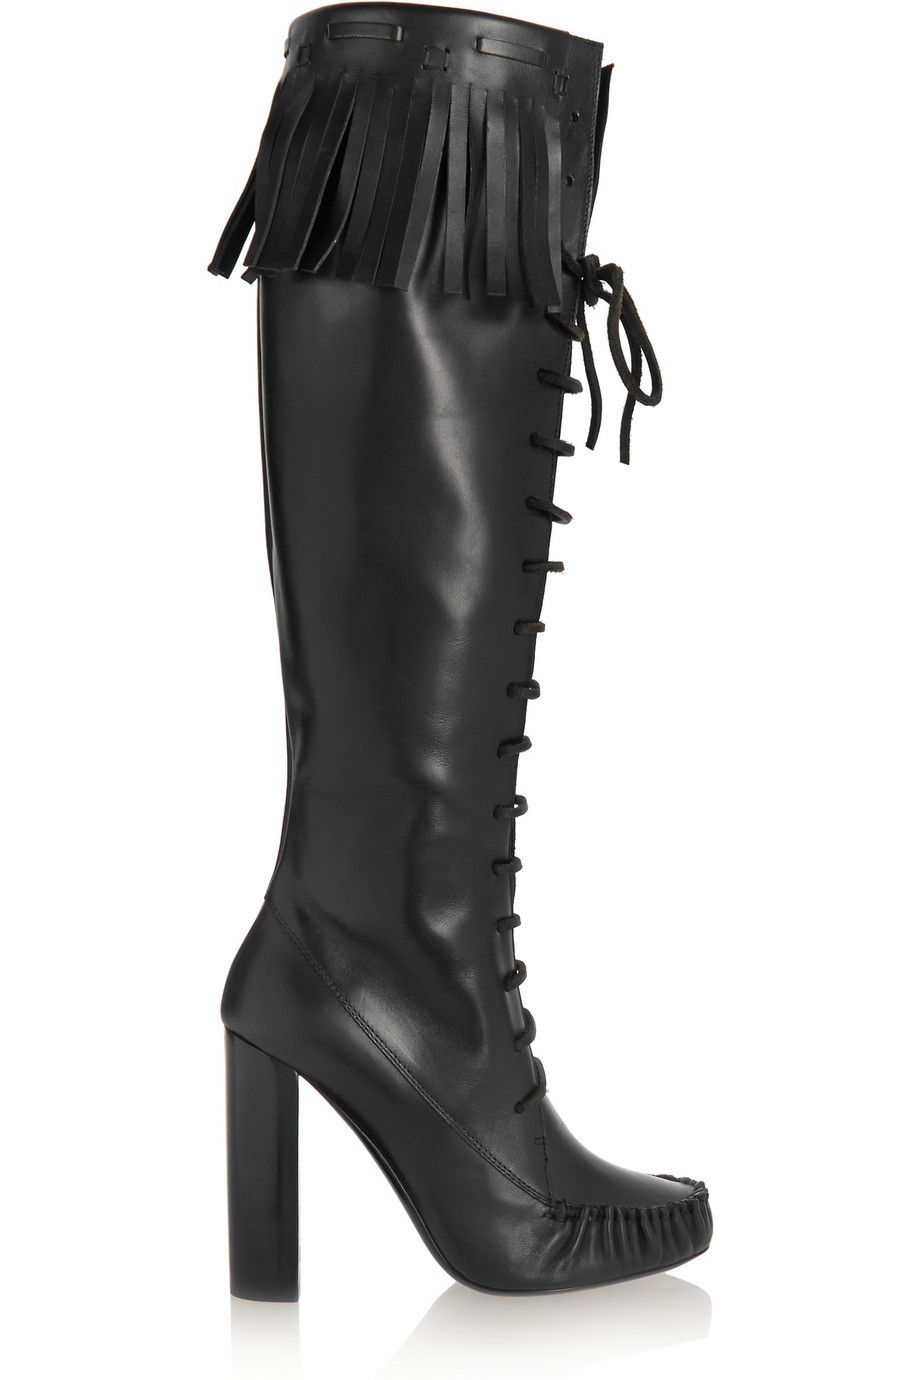 Footwear, Boot, Shoe, Leather, Fashion, Black, Knee-high boot, Riding boot, High heels, Liver, 